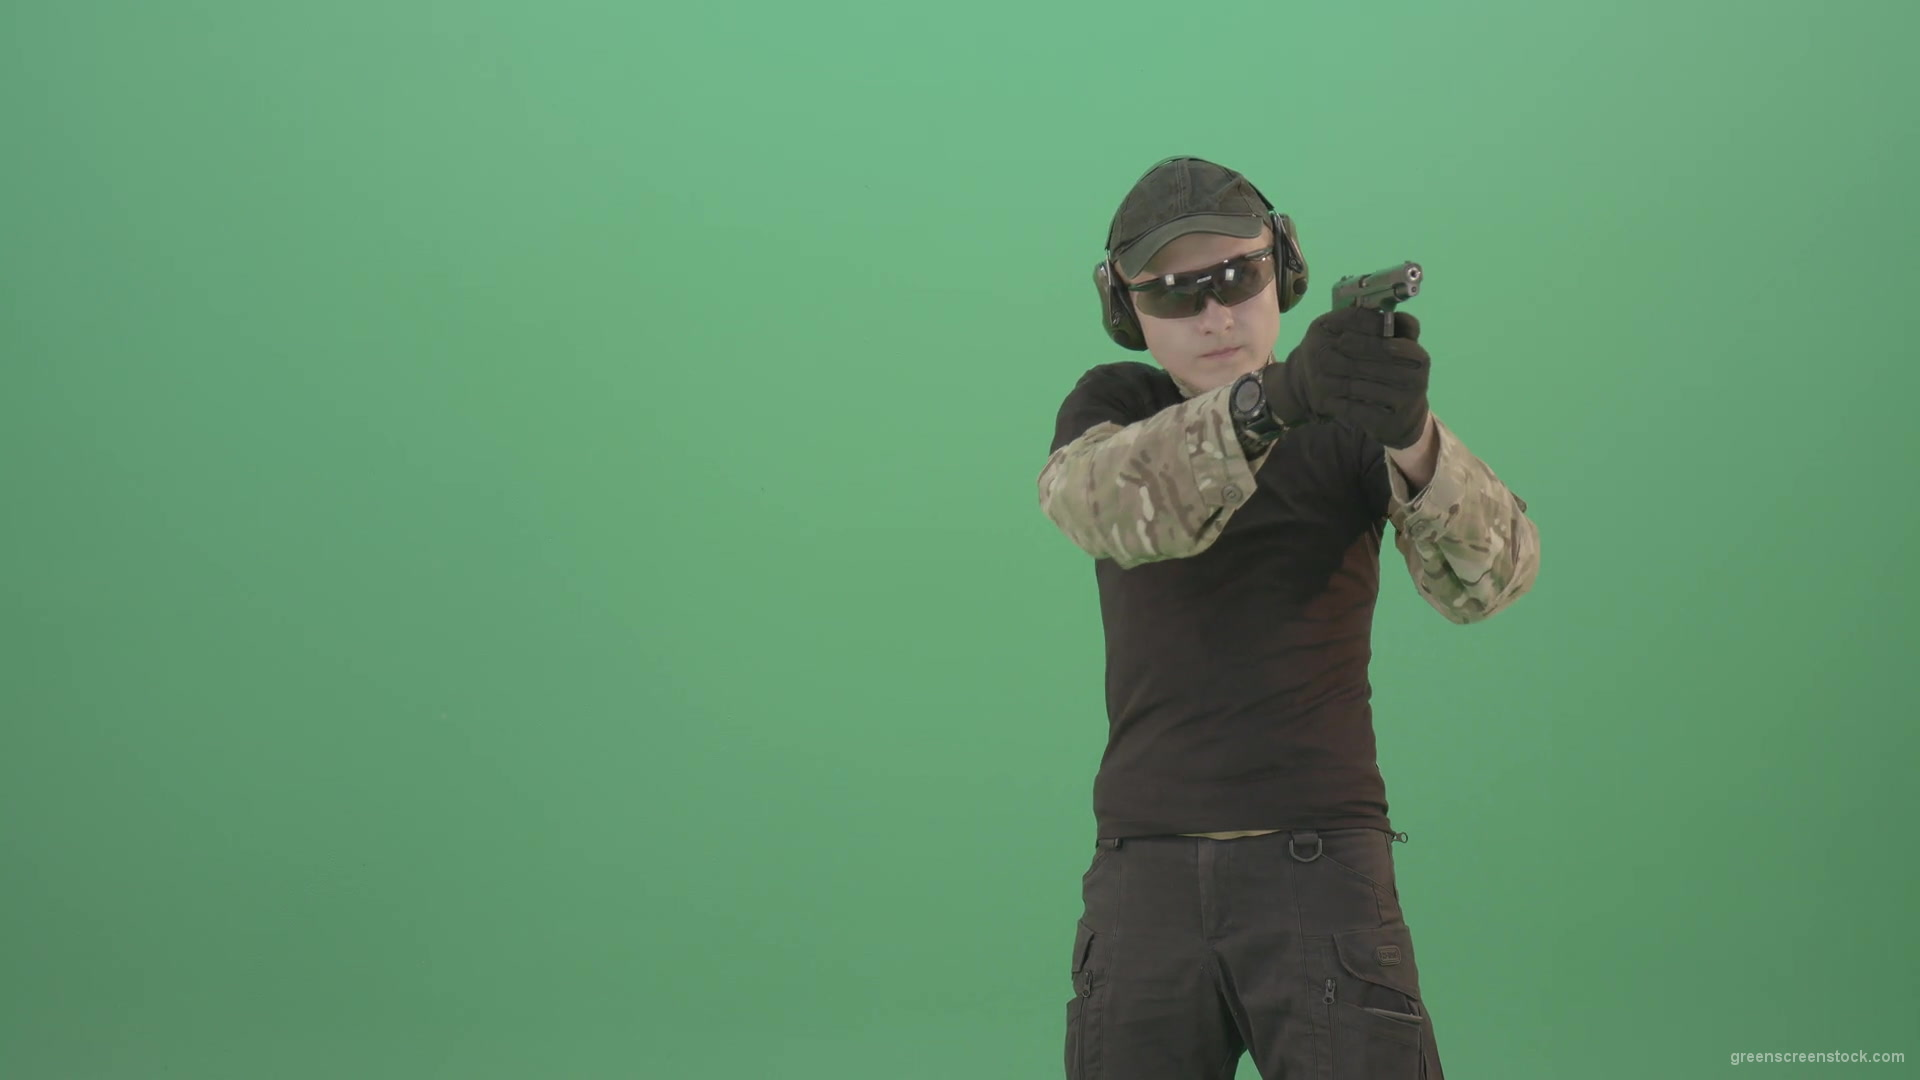 Young-boy-sodier-testin-small-pistol-gun-and-shooting-isolated-on-green-screen-4K-Video-Footage-1920_009 Green Screen Stock